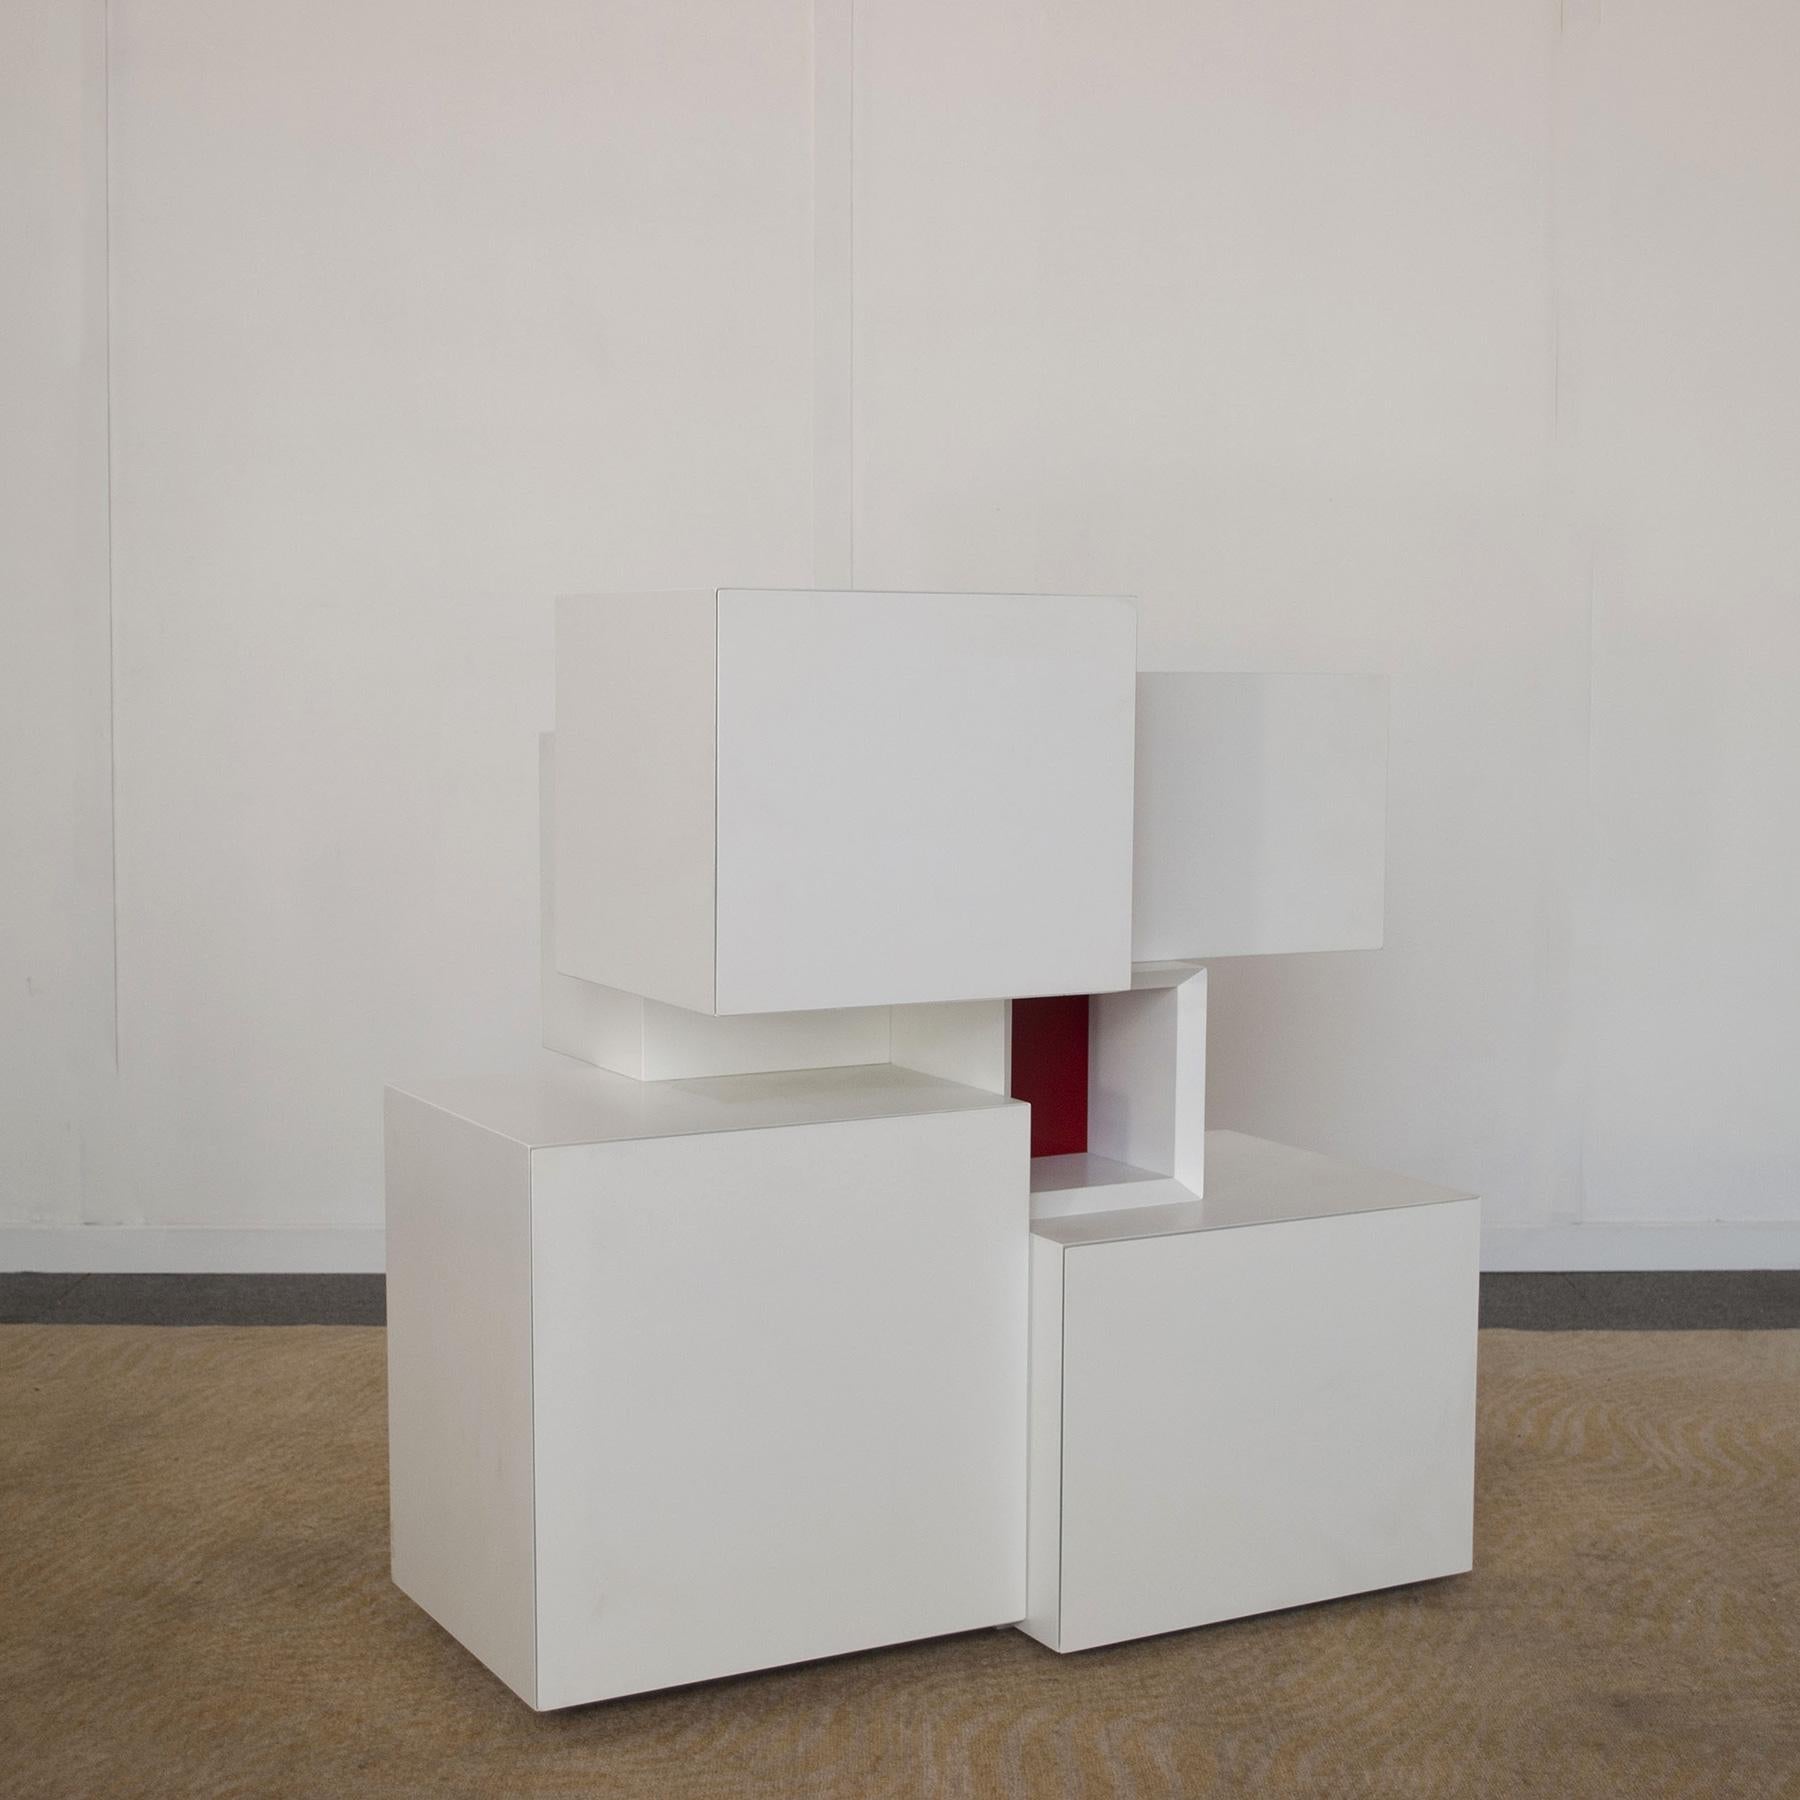 Centre piece storage unit in white lacquered wood with red central insert in the style of designer Ludovico Acerbis, produced in the late 1960s.